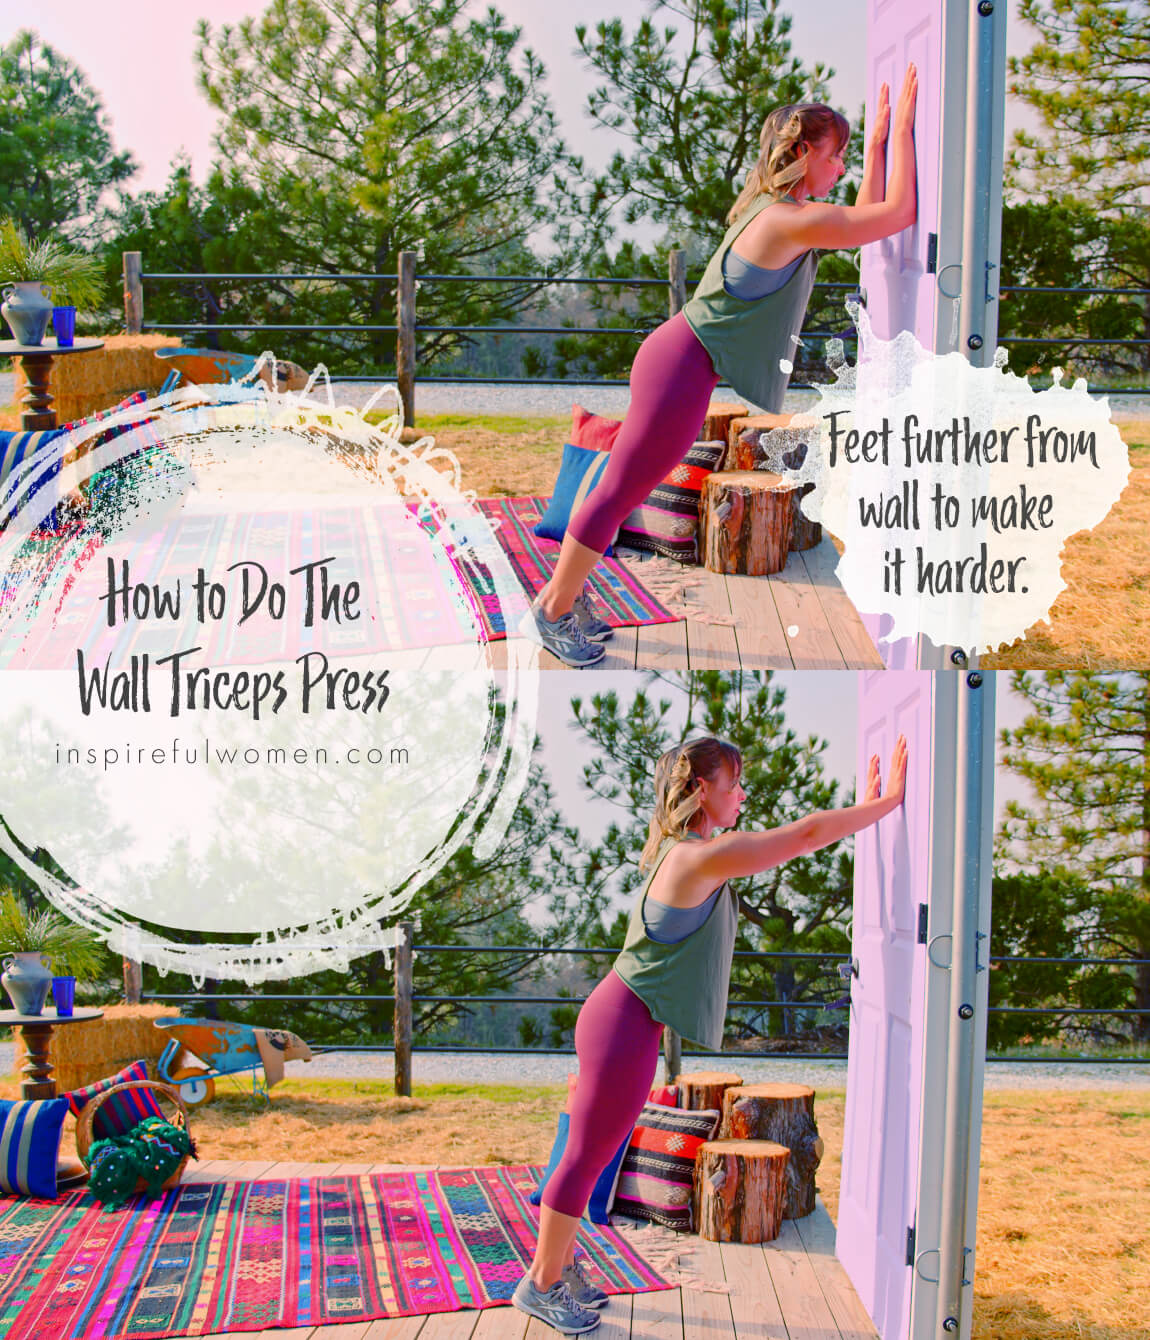 how-to-wall-triceps-press-extension-bodyweight-arm-exercise-at-home-proper-form-side